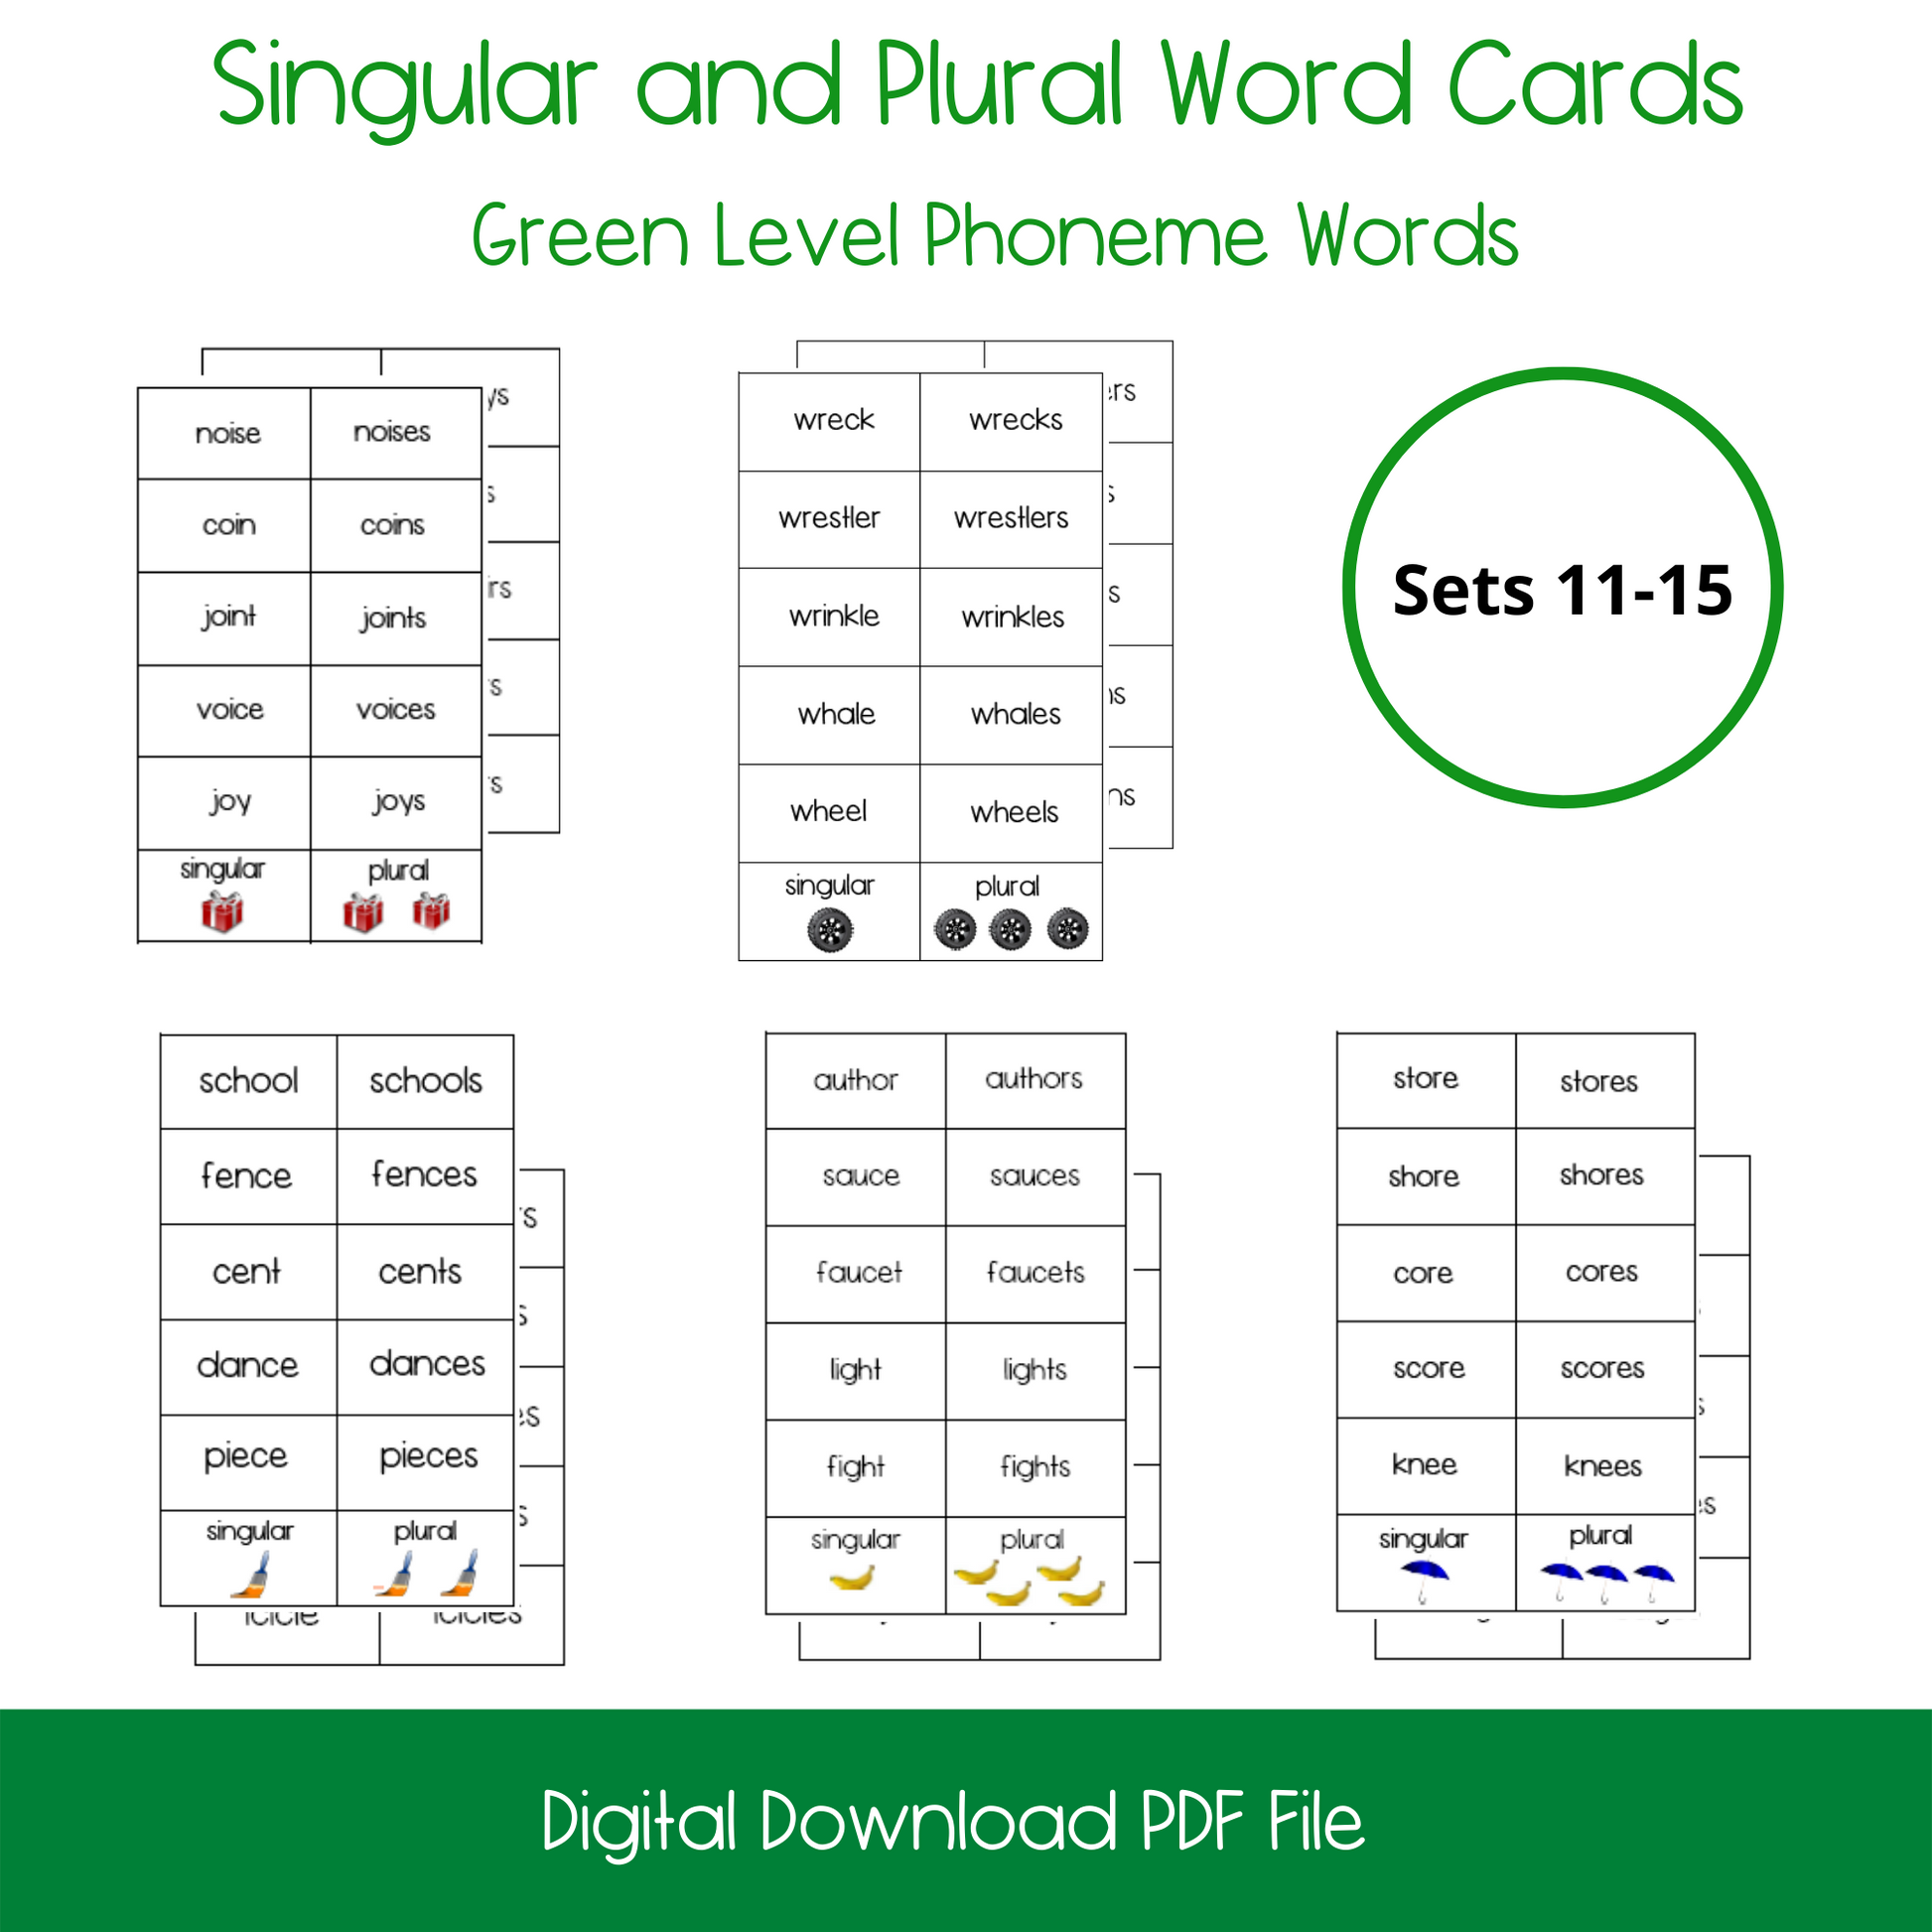 Printable Montessori Green Level Singular and Plural Cards, printable elementary singular and plural activity cards, printable ELL and ESL singular and plural cards for english language learners, homeschool